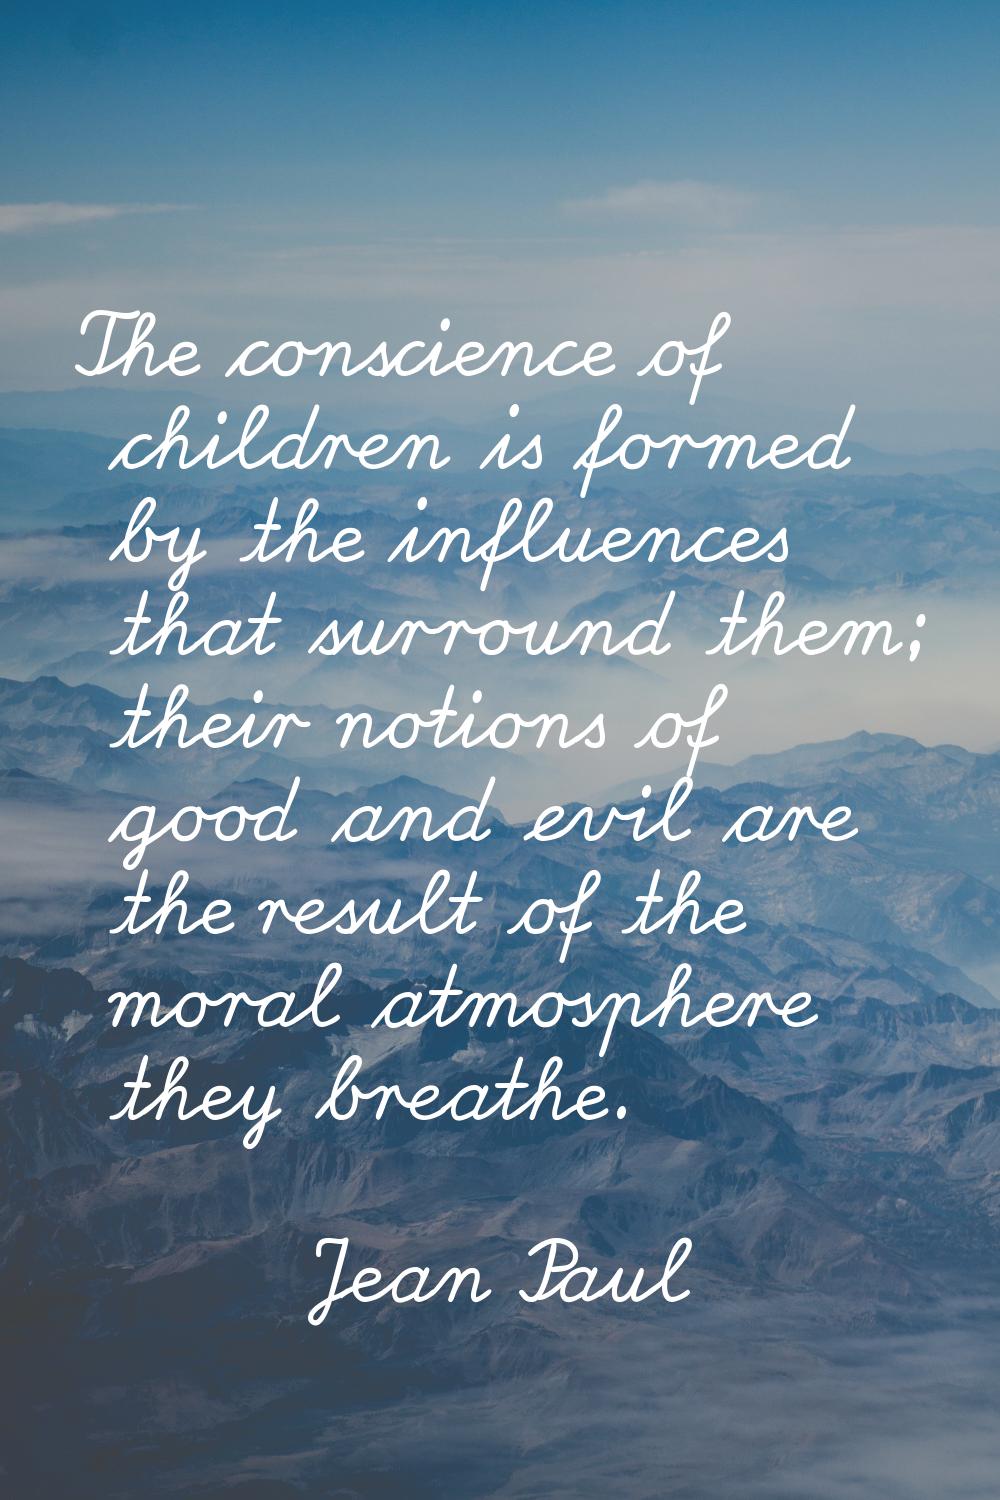 The conscience of children is formed by the influences that surround them; their notions of good an